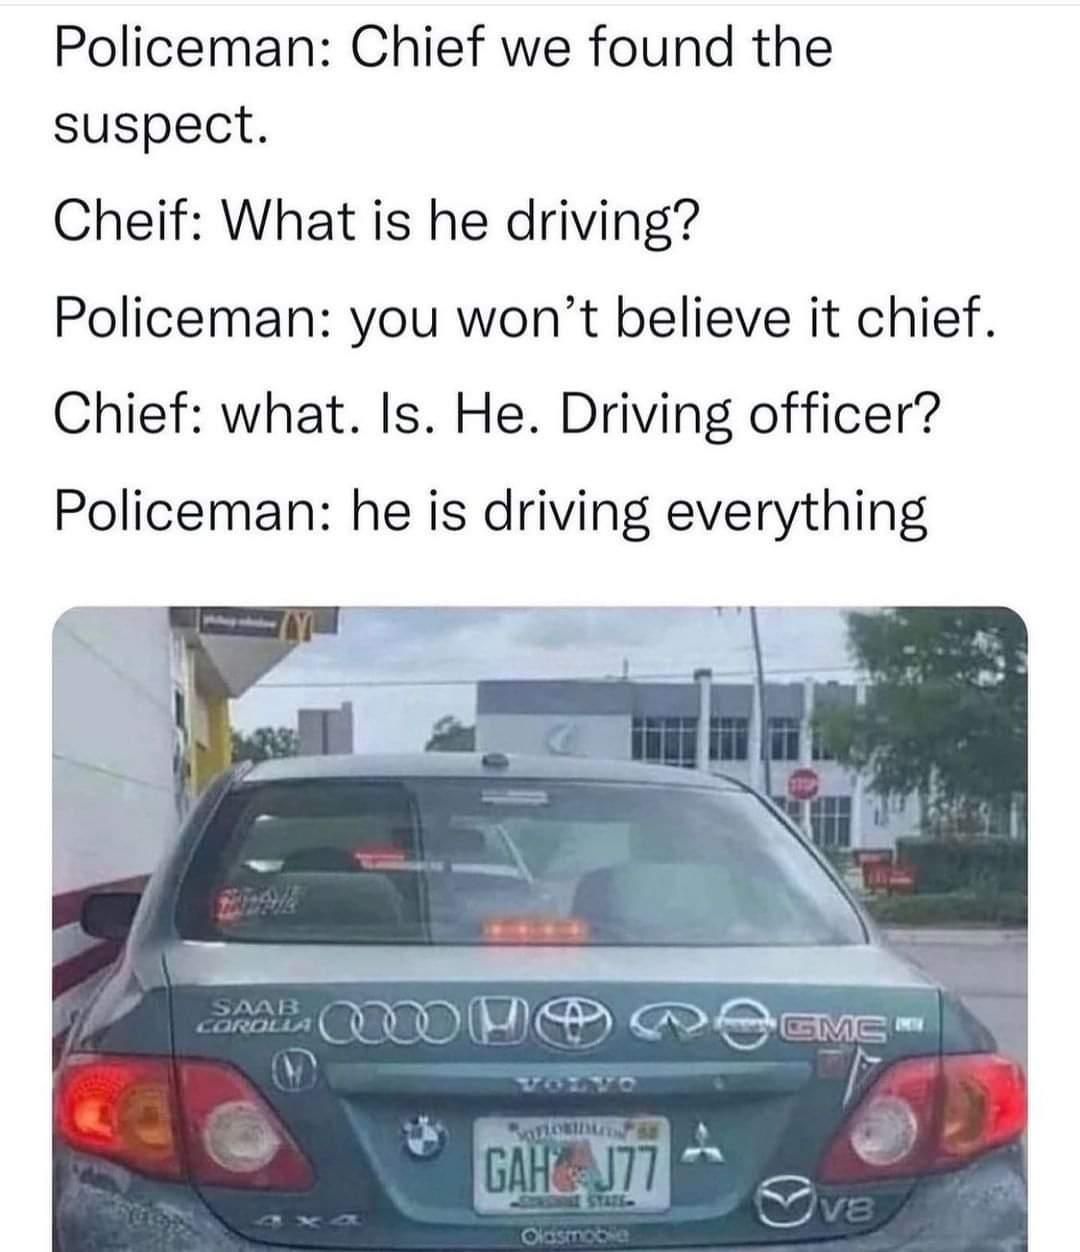 he drivers everything